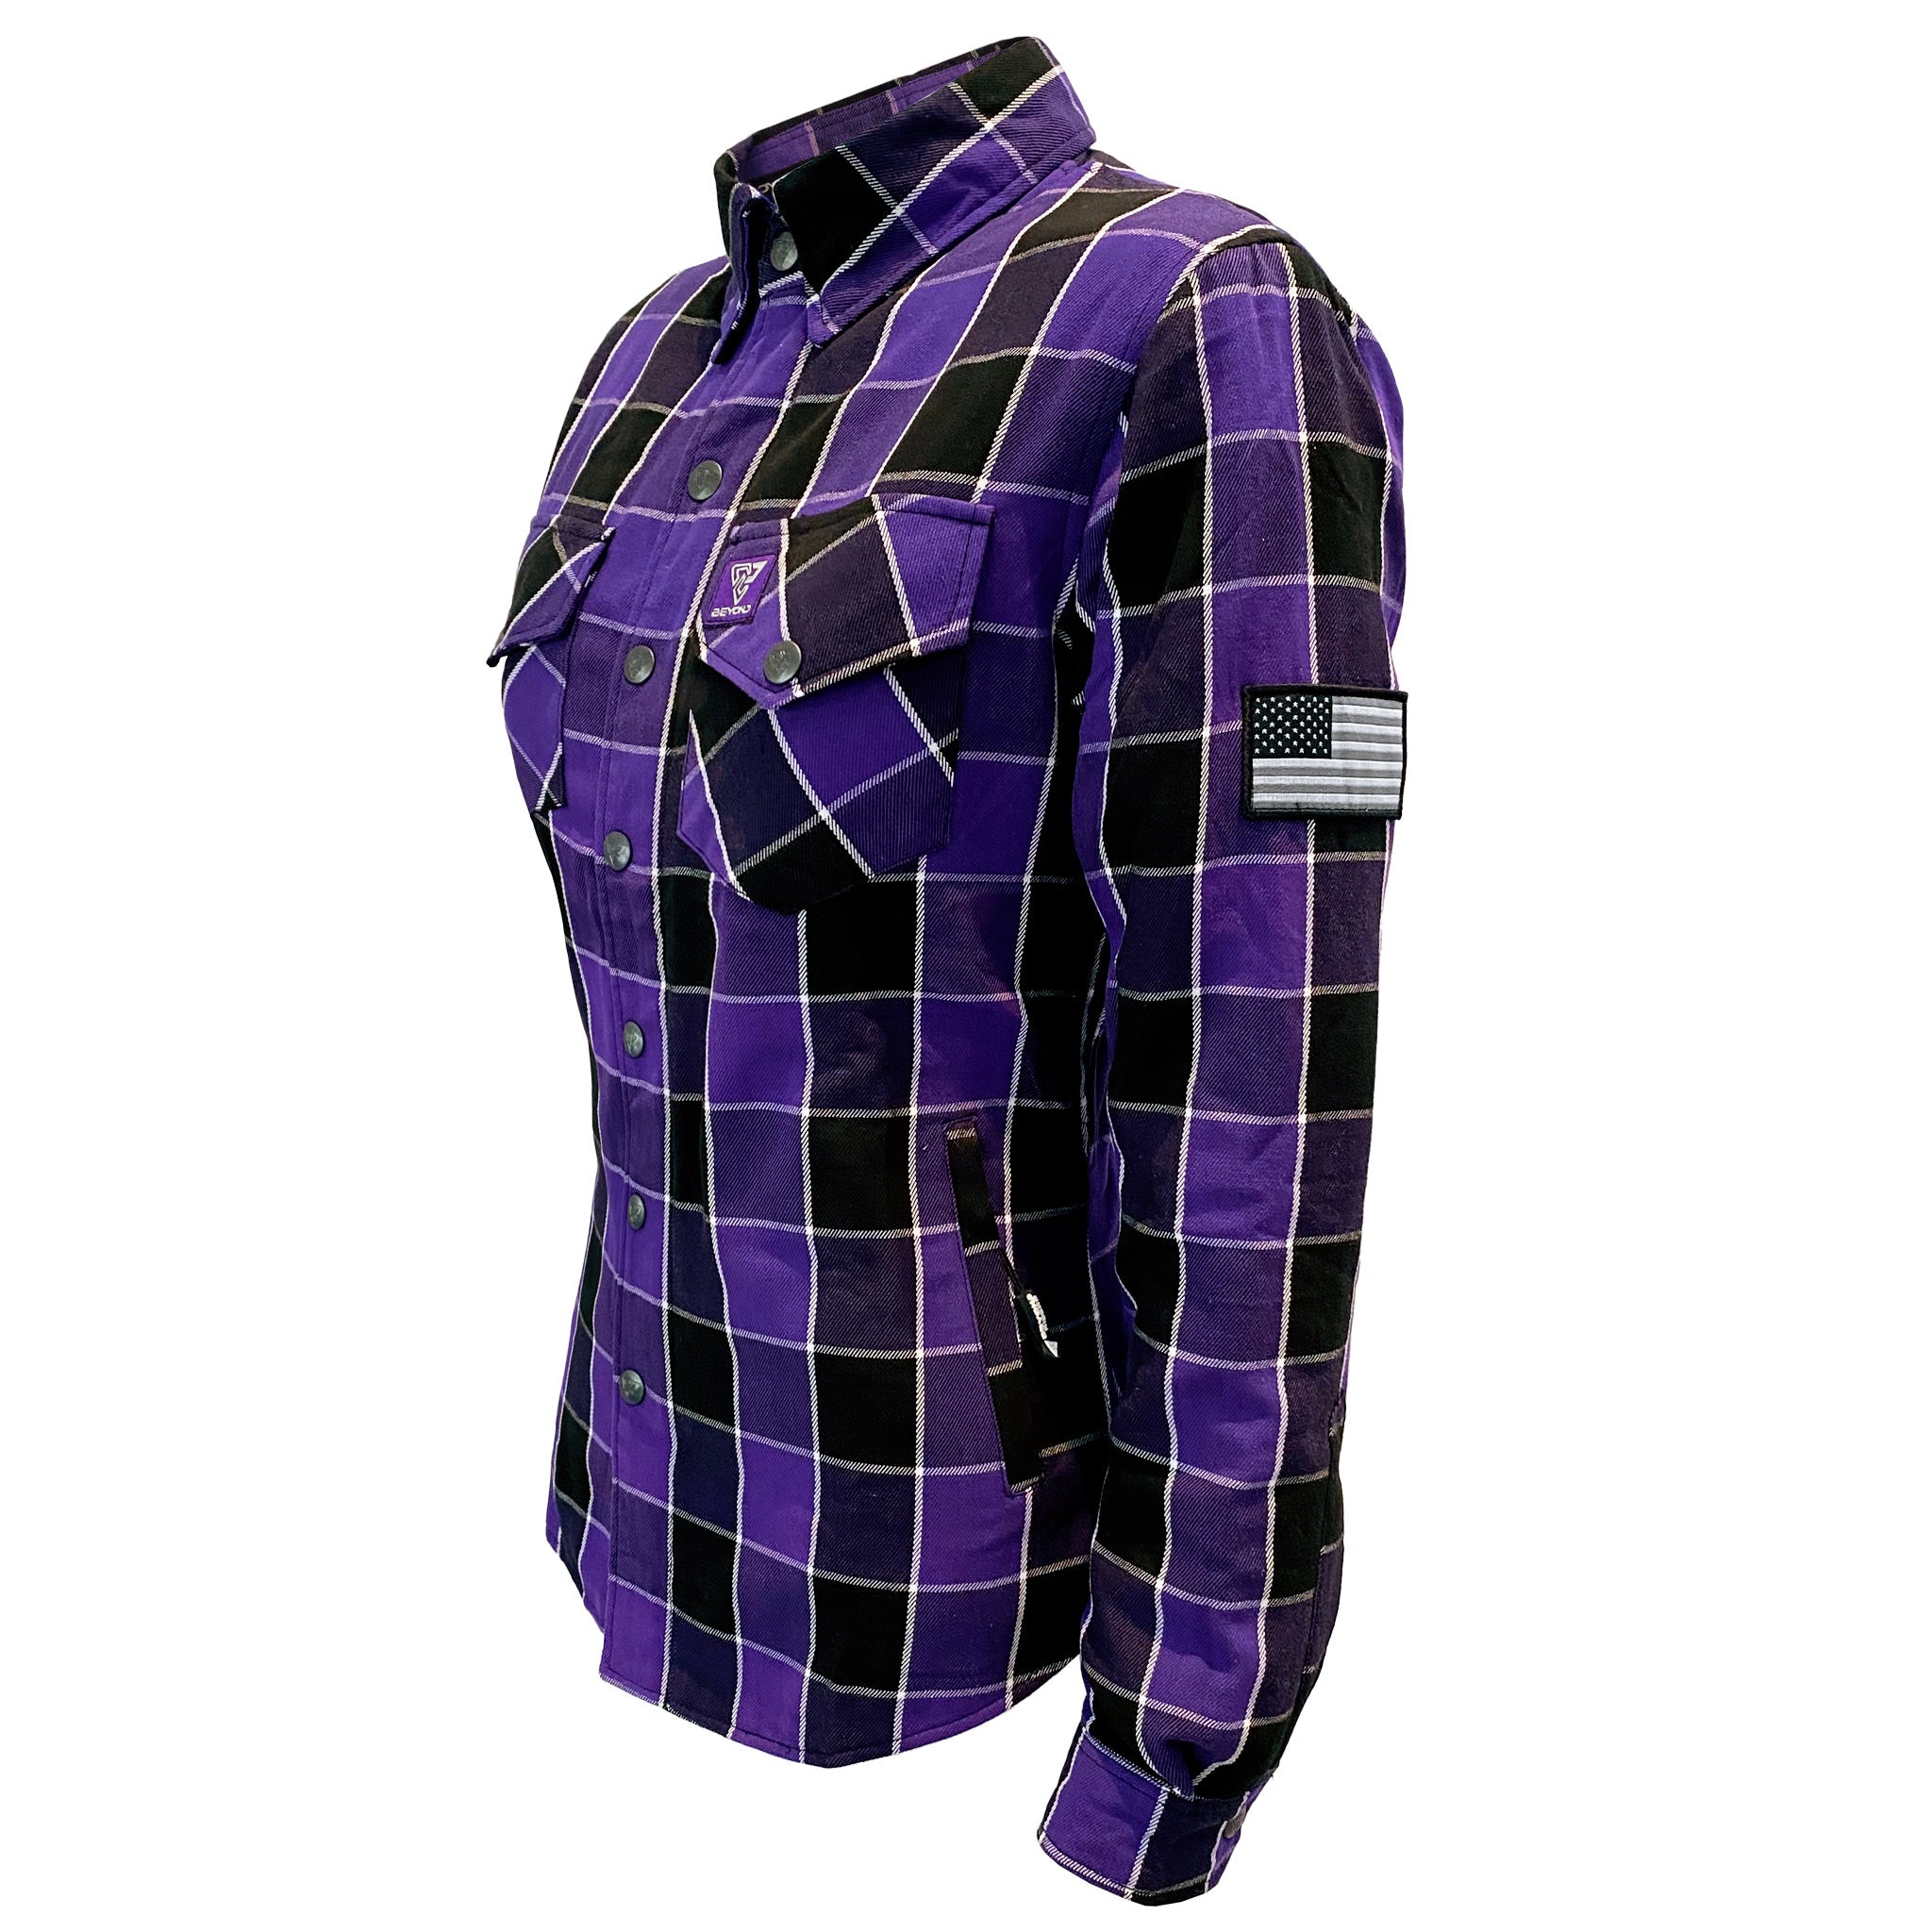 Protective Flannel Shirt for Women - Purple, Black and White Stripes with Pads